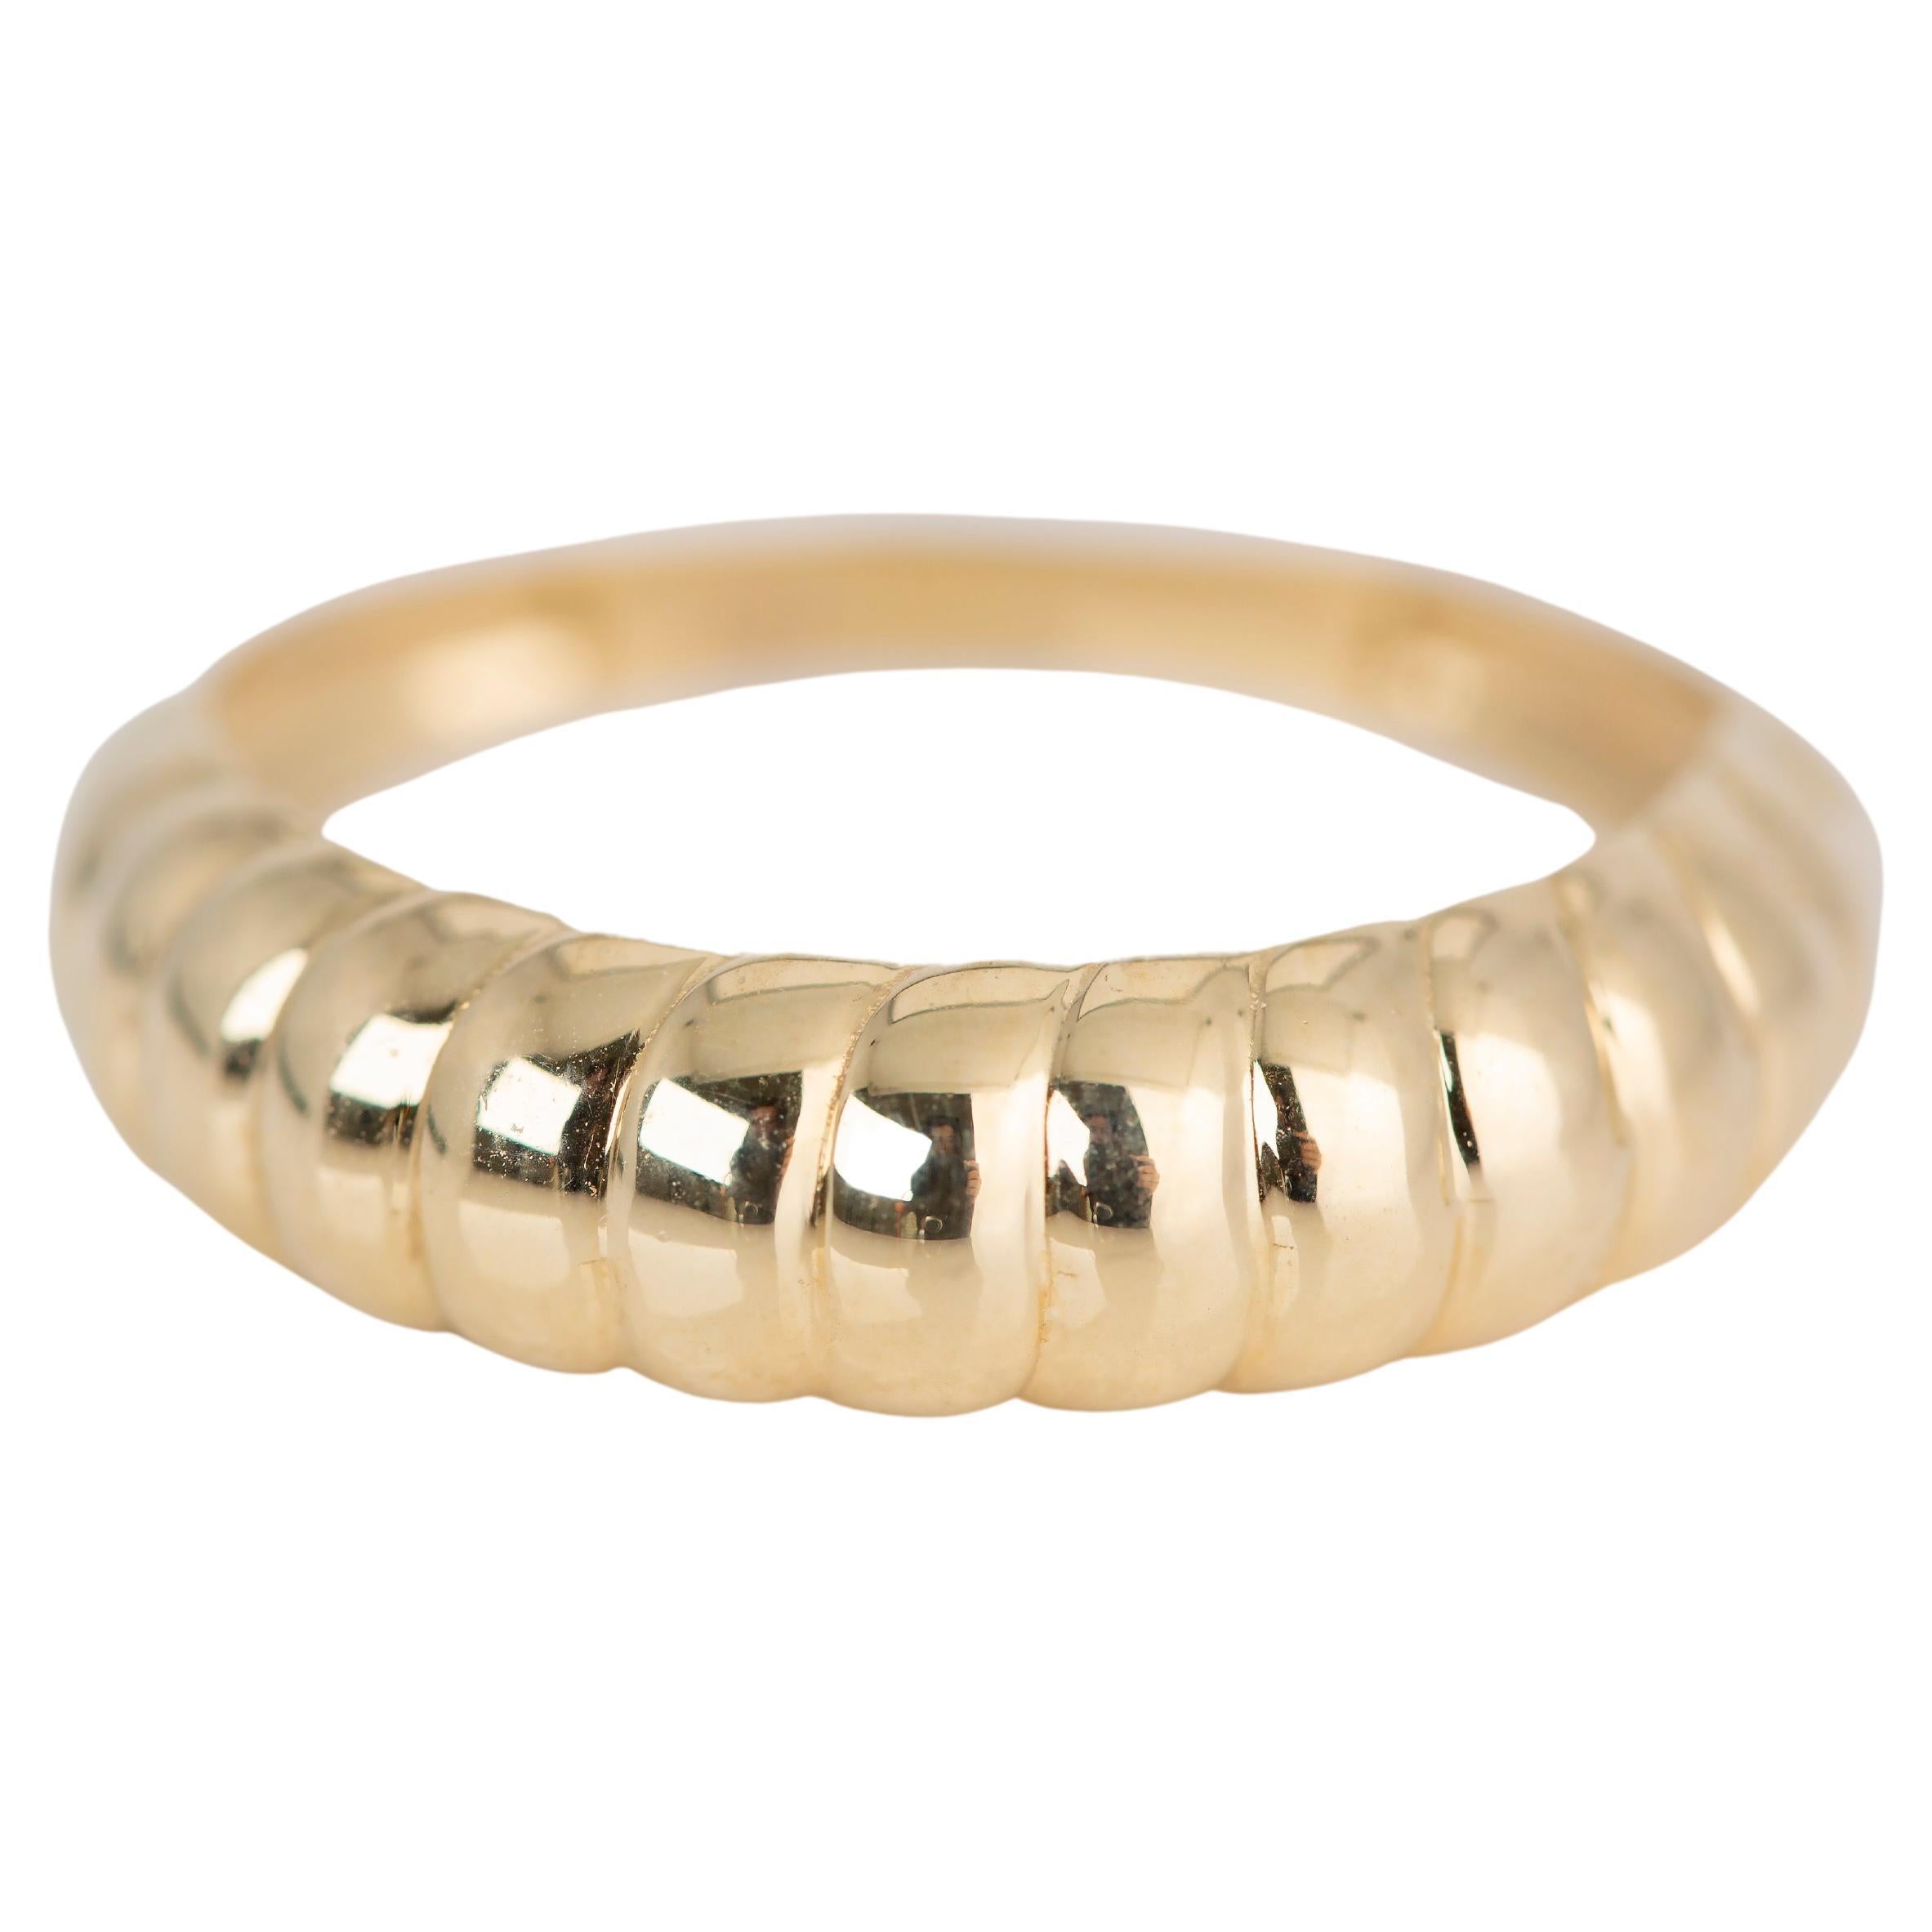 For Sale:  14K Gold Croissant Ring, Half Croissant Ring, Dome Ring